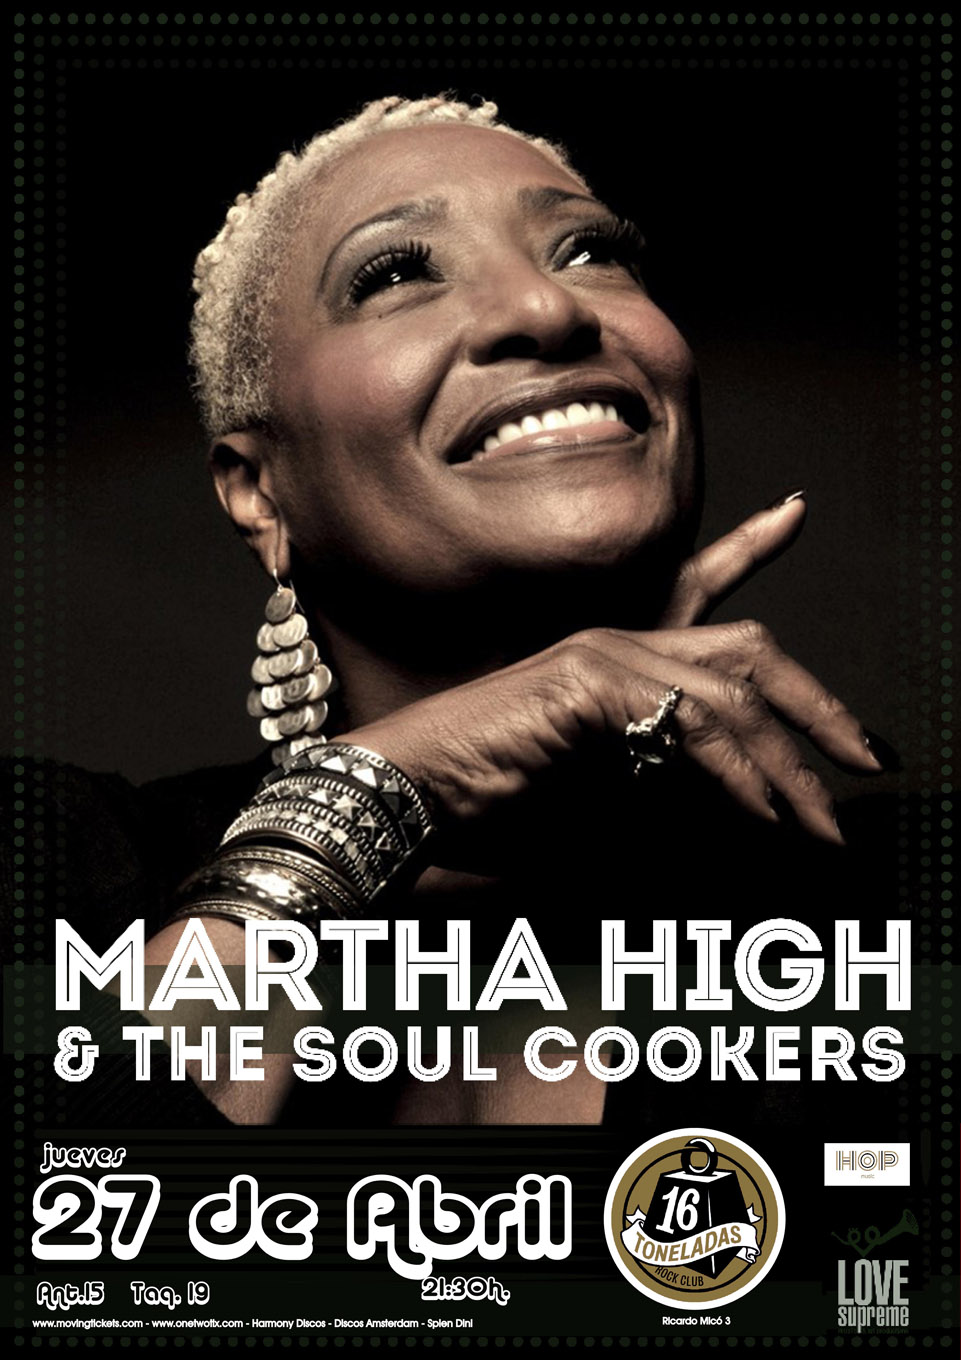 27-j-cartel-martha-high-and-the-soul-cookers2